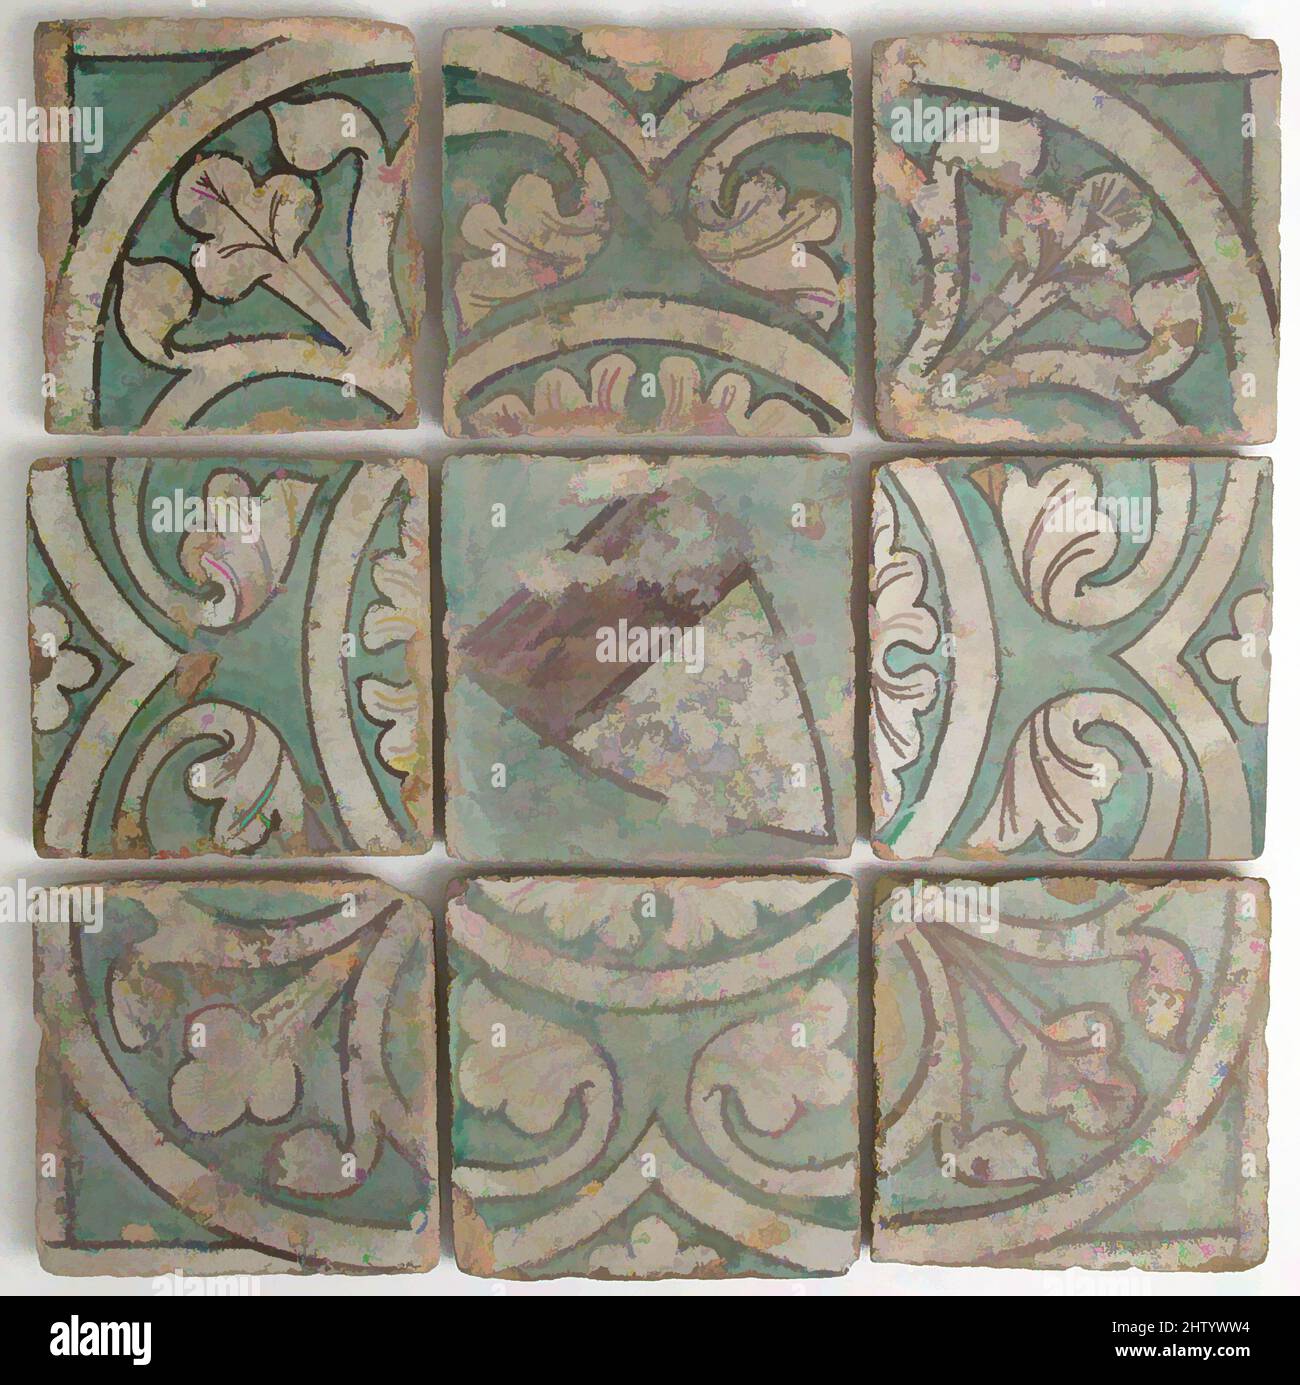 Art inspired by Nine Tiles, 14th century, French, Earthenware, tin-glazed, Overall (together with approx. 1/4' between each): 13 3/4 x 13 3/4 x 13/16 in. (35 x 35 x 2.1 cm), Ceramics-Tiles, Classic works modernized by Artotop with a splash of modernity. Shapes, color and value, eye-catching visual impact on art. Emotions through freedom of artworks in a contemporary way. A timeless message pursuing a wildly creative new direction. Artists turning to the digital medium and creating the Artotop NFT Stock Photo